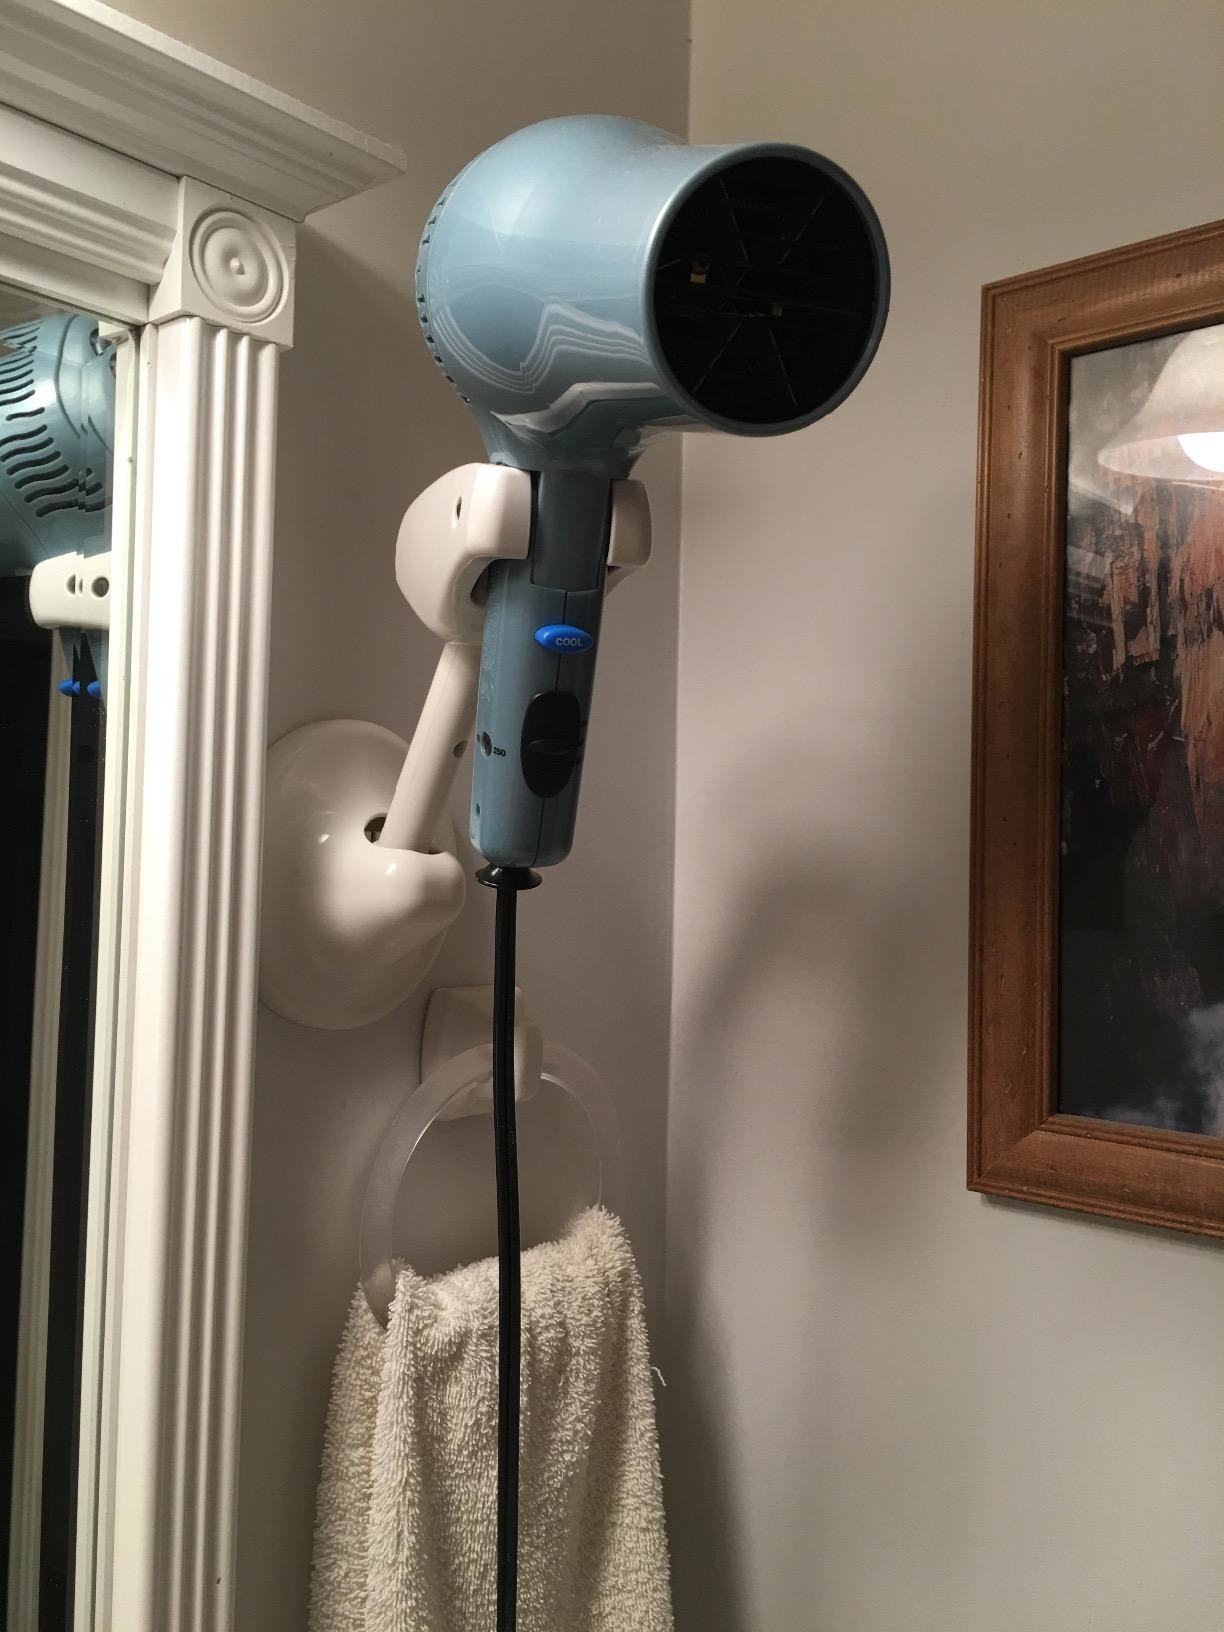 reviewer image of the adjustable stand mounted to the wall holding up a blow dryer